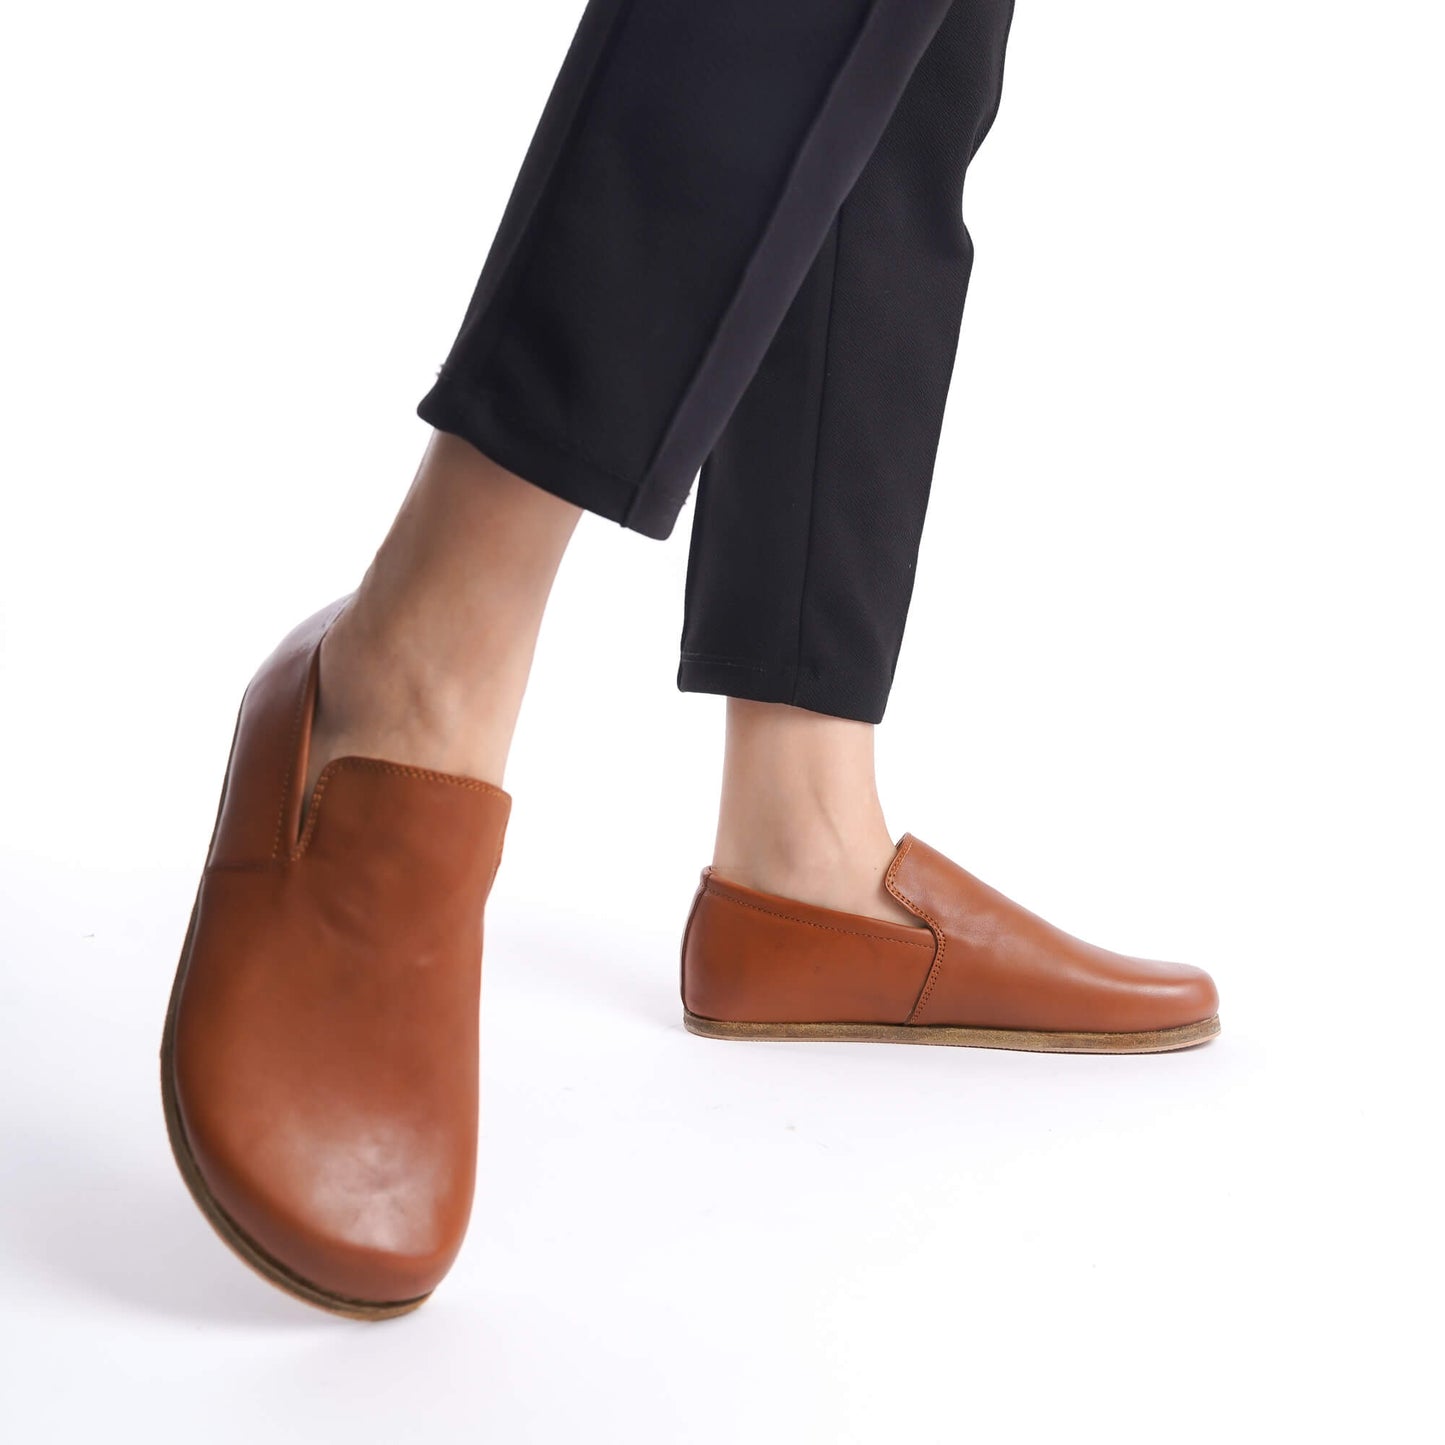 Aeolia tan brown leather barefoot women loafers, paired with black pants, featuring a minimalist and comfortable design.